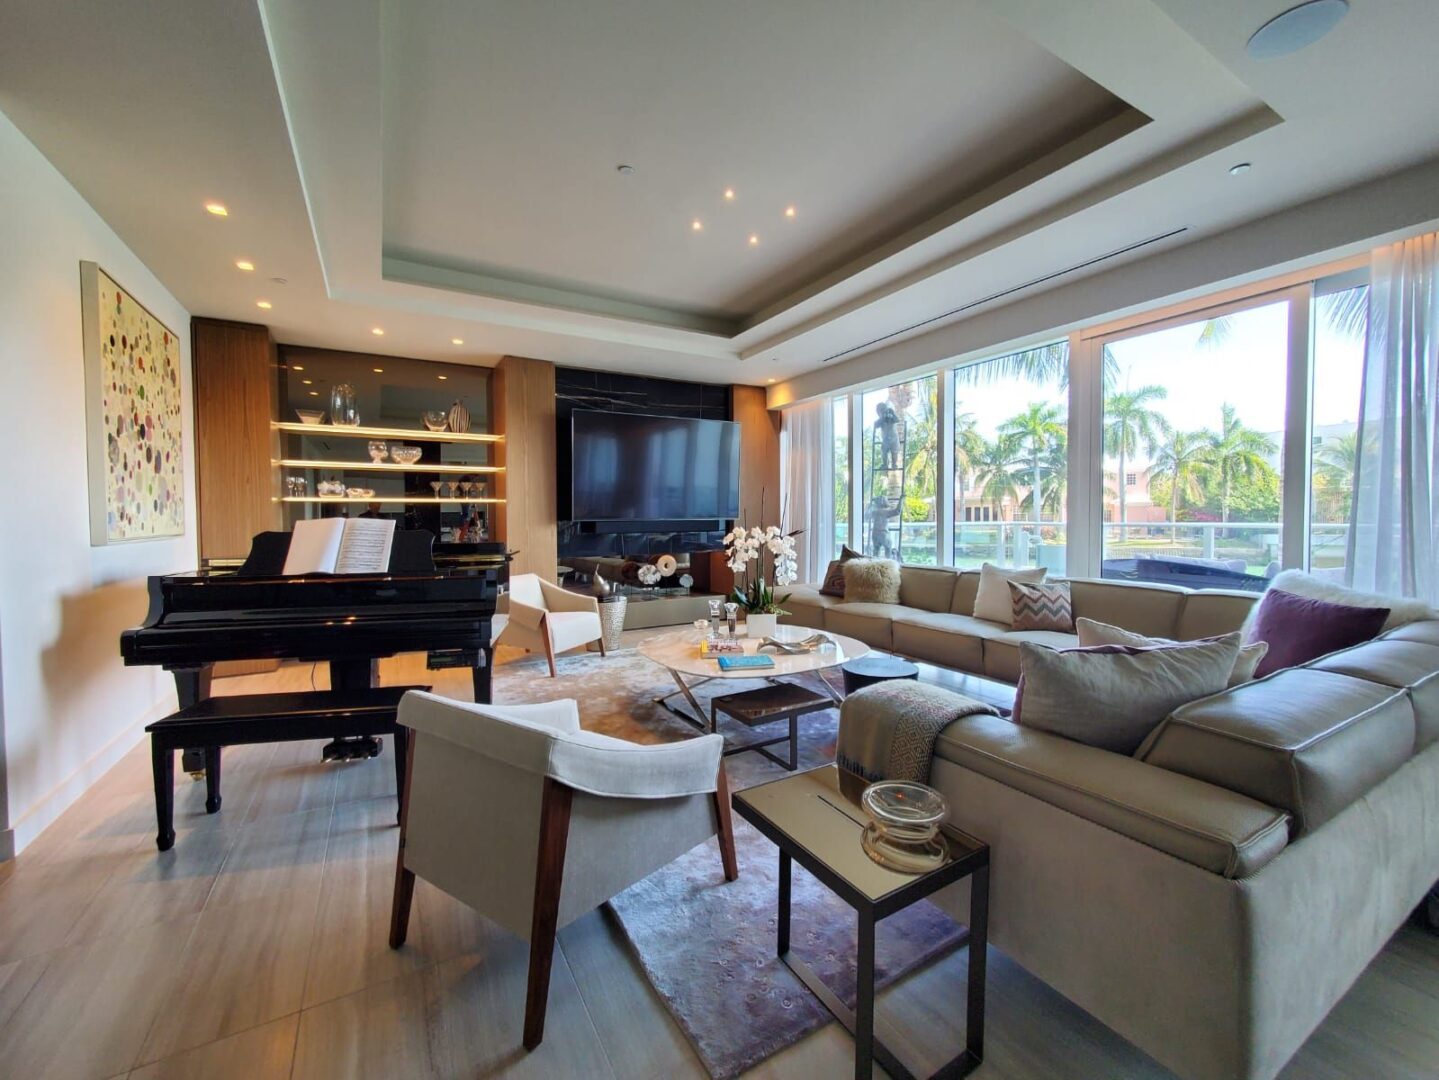 A living room with a piano and couch